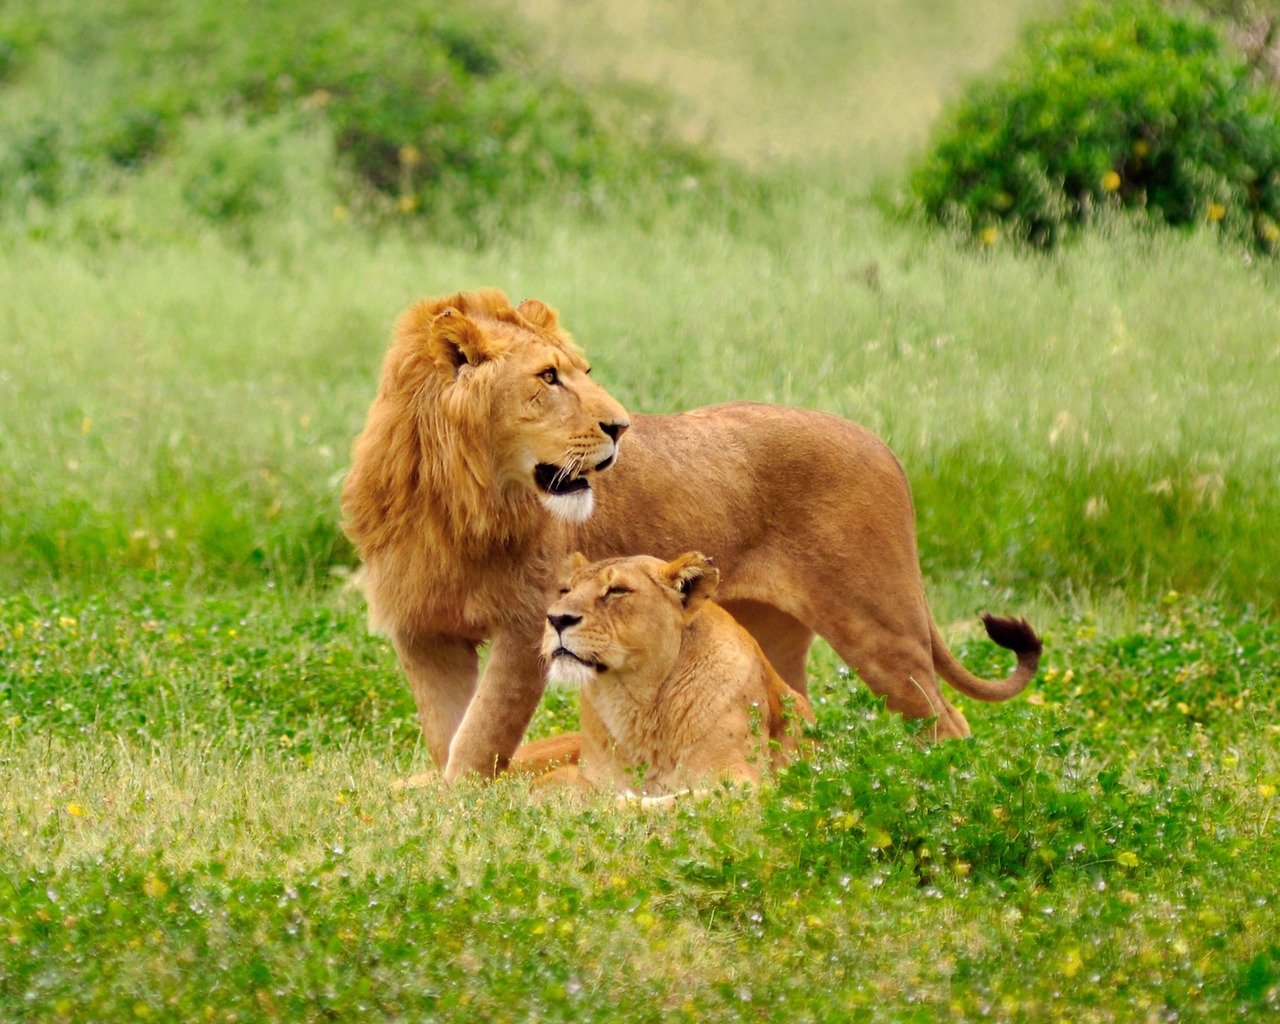 Lions on the grass for 1280 x 1024 resolution